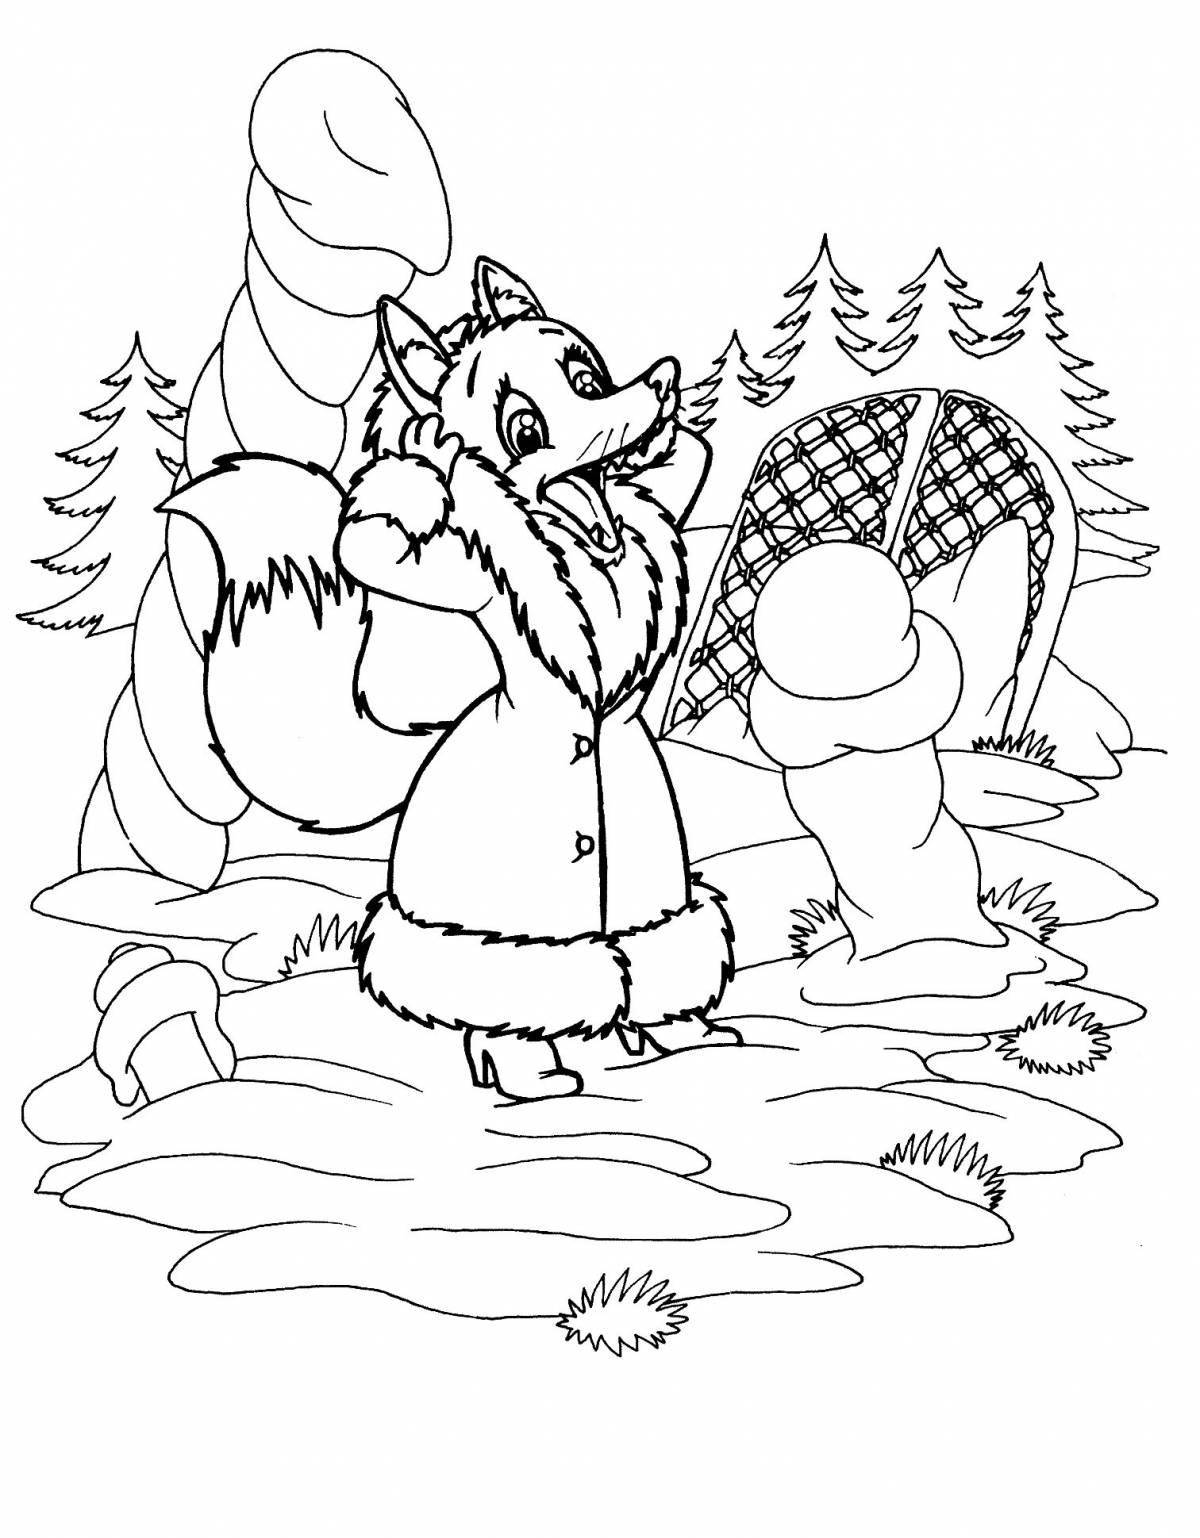 Coloring page charming fox and hare